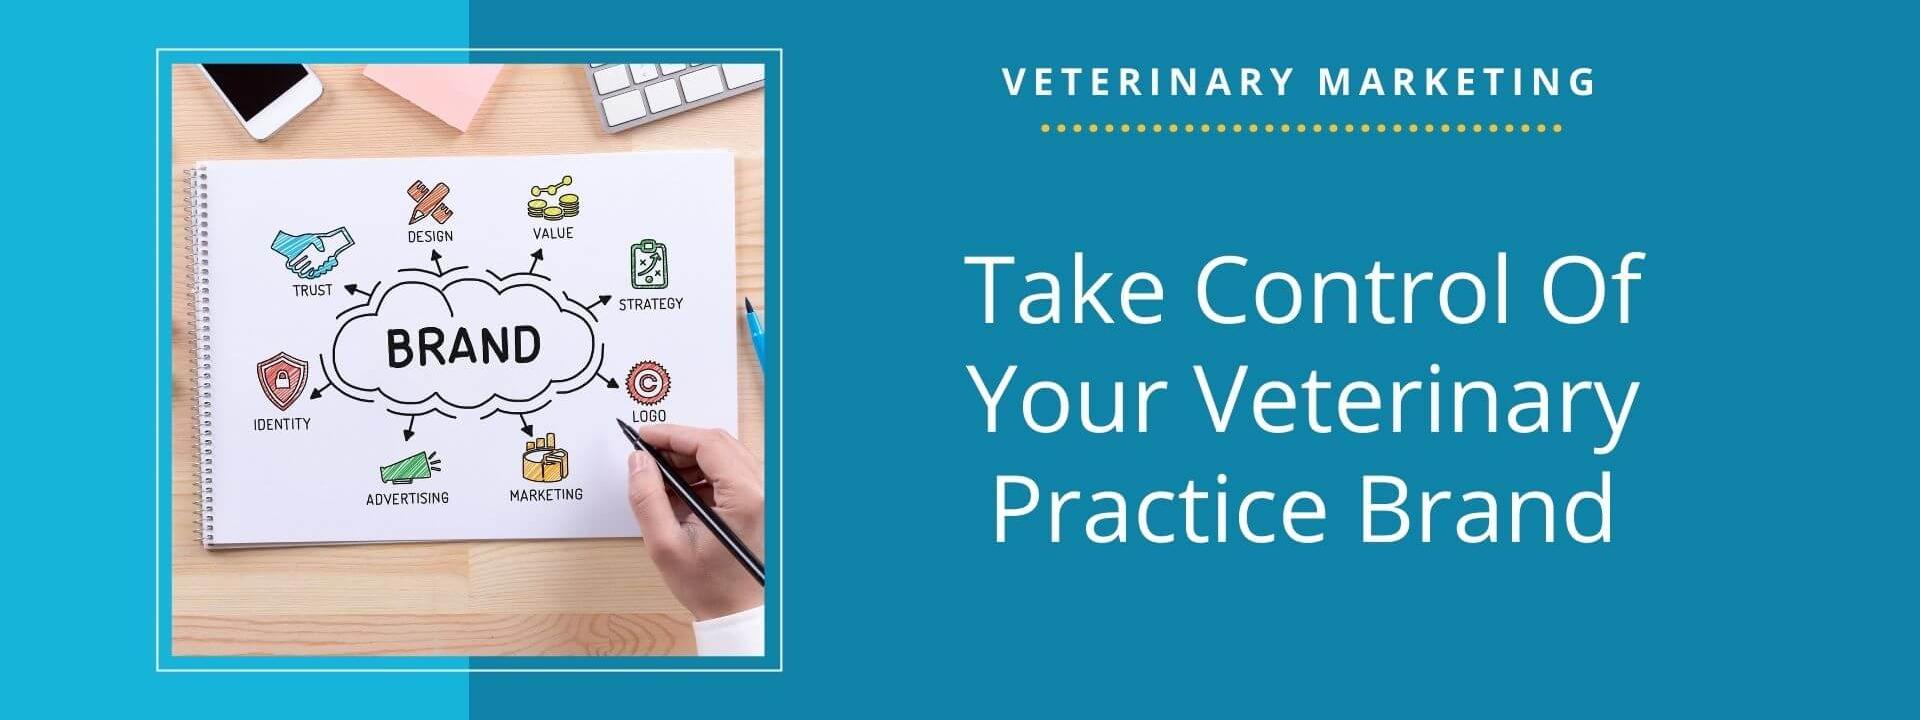 Take Control Of Your Veterinary Practice Brand